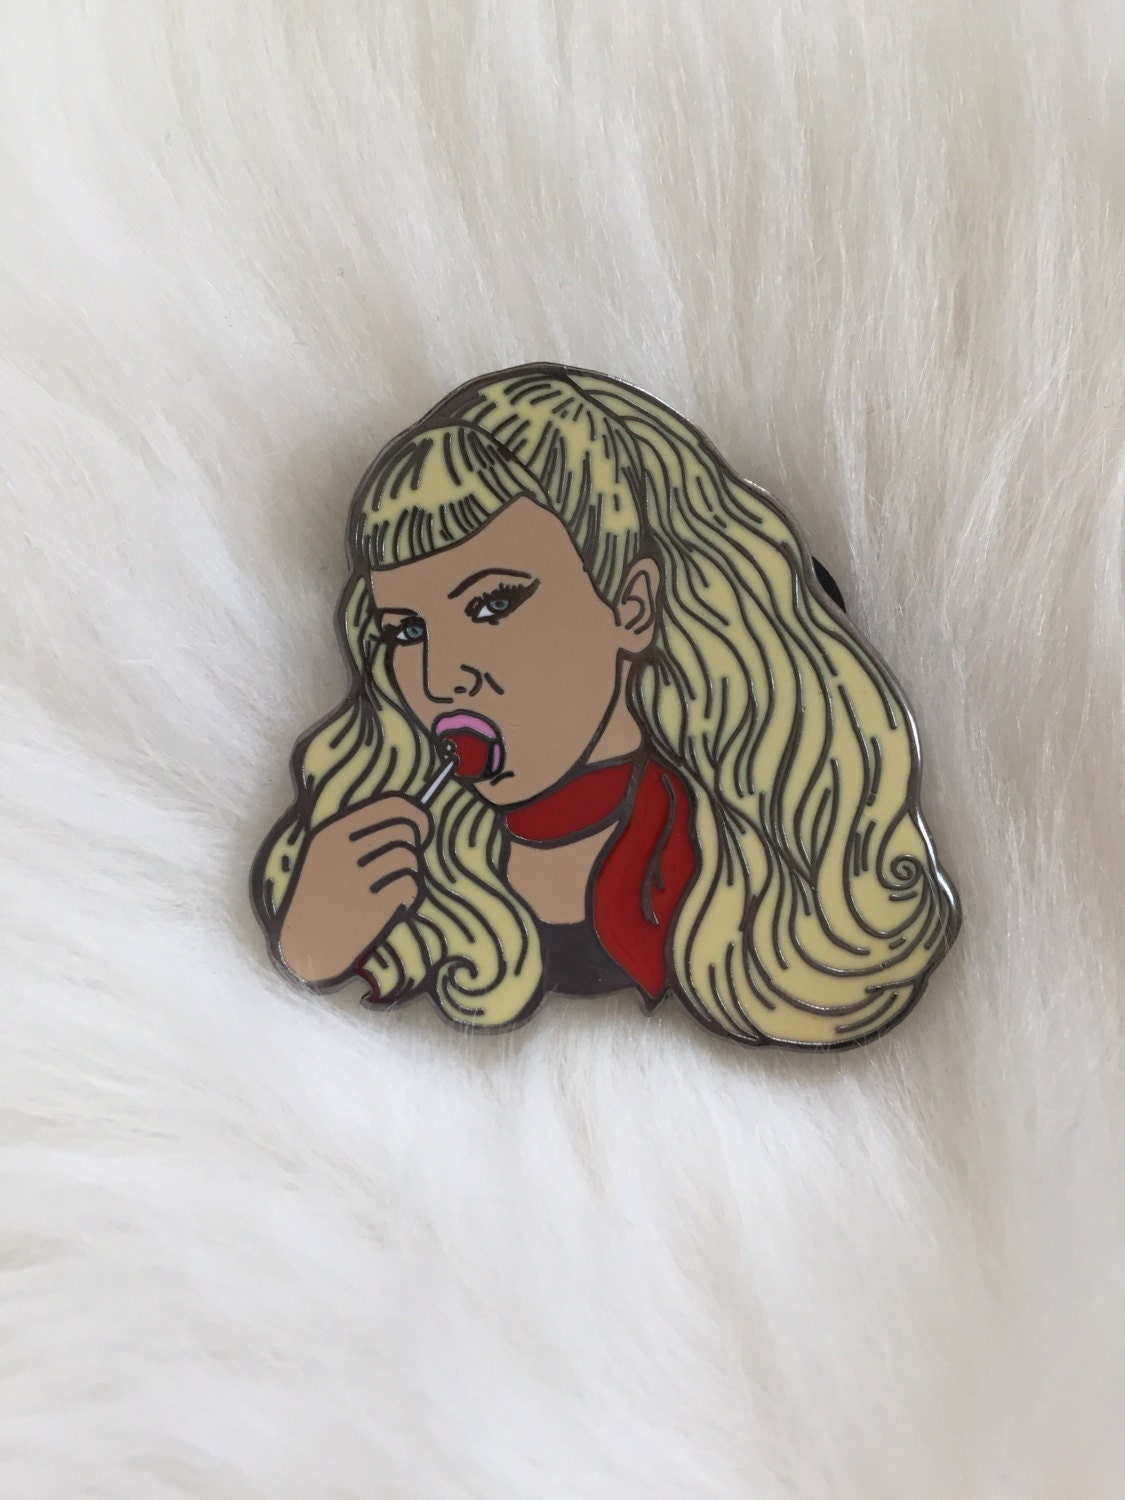 Pin on Cry baby